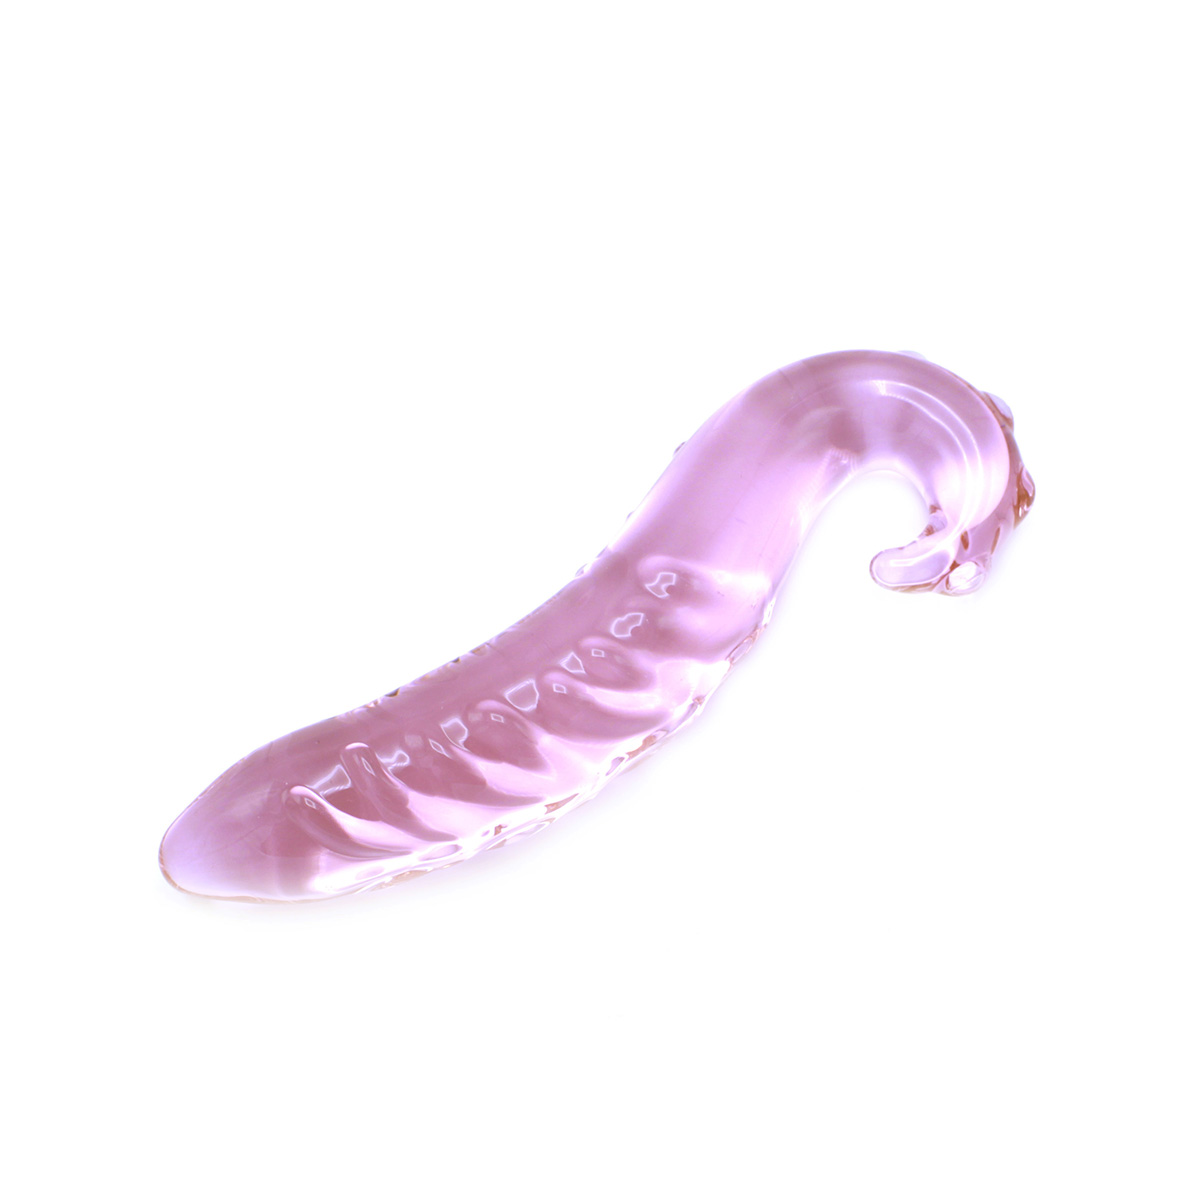 Pink-Tentacle-Glass-Dildo-OPR-2820063-2